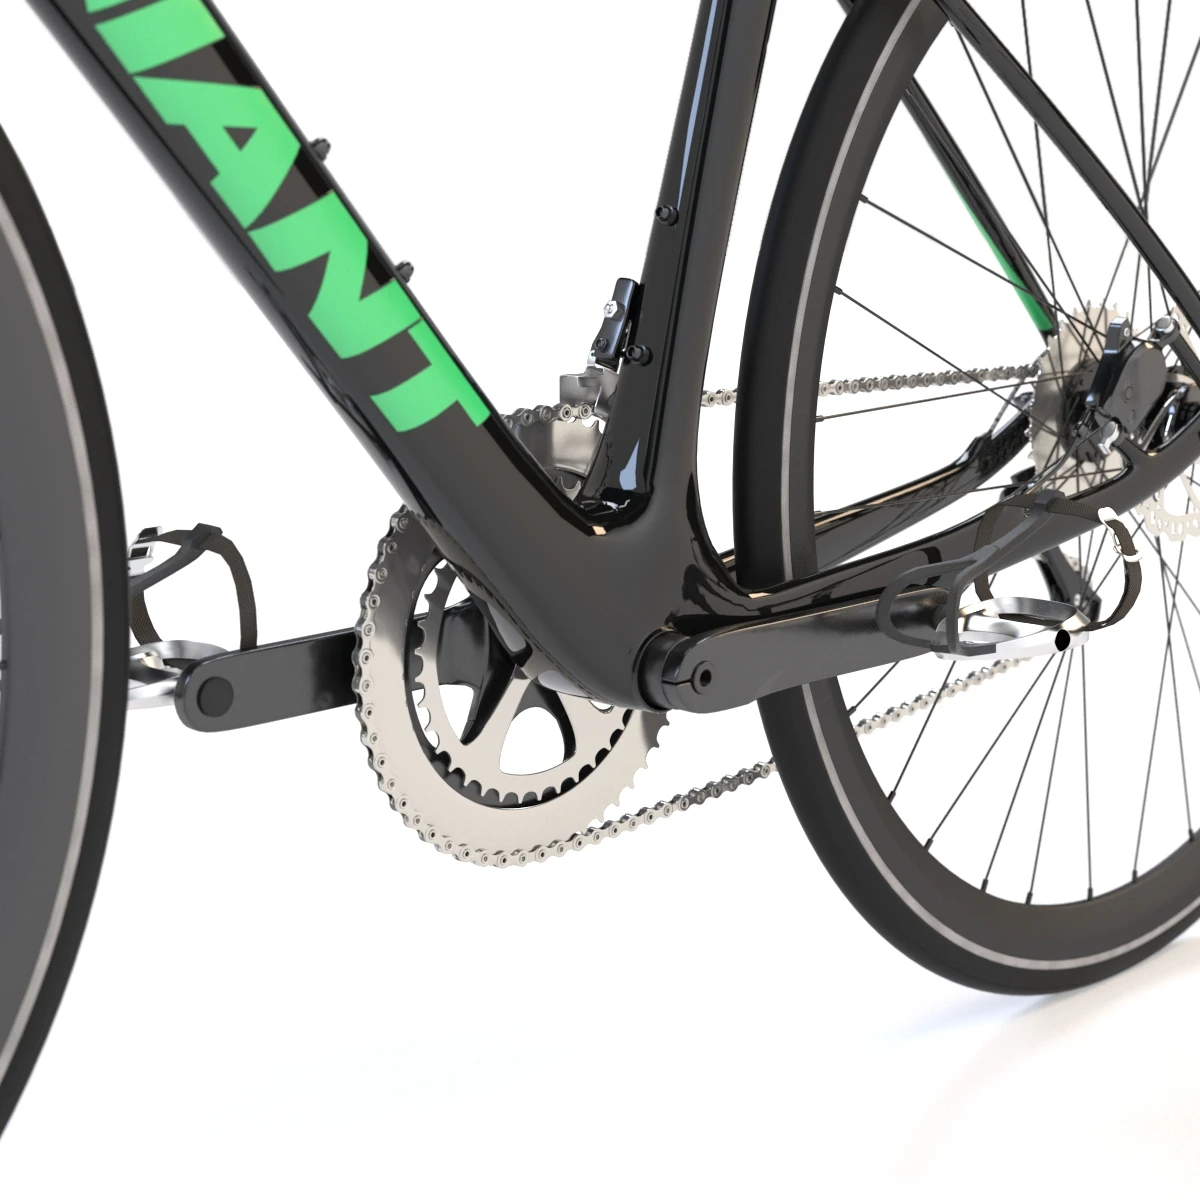 Giant Fastroad Cm1 Black Bicycle 3D Model_08